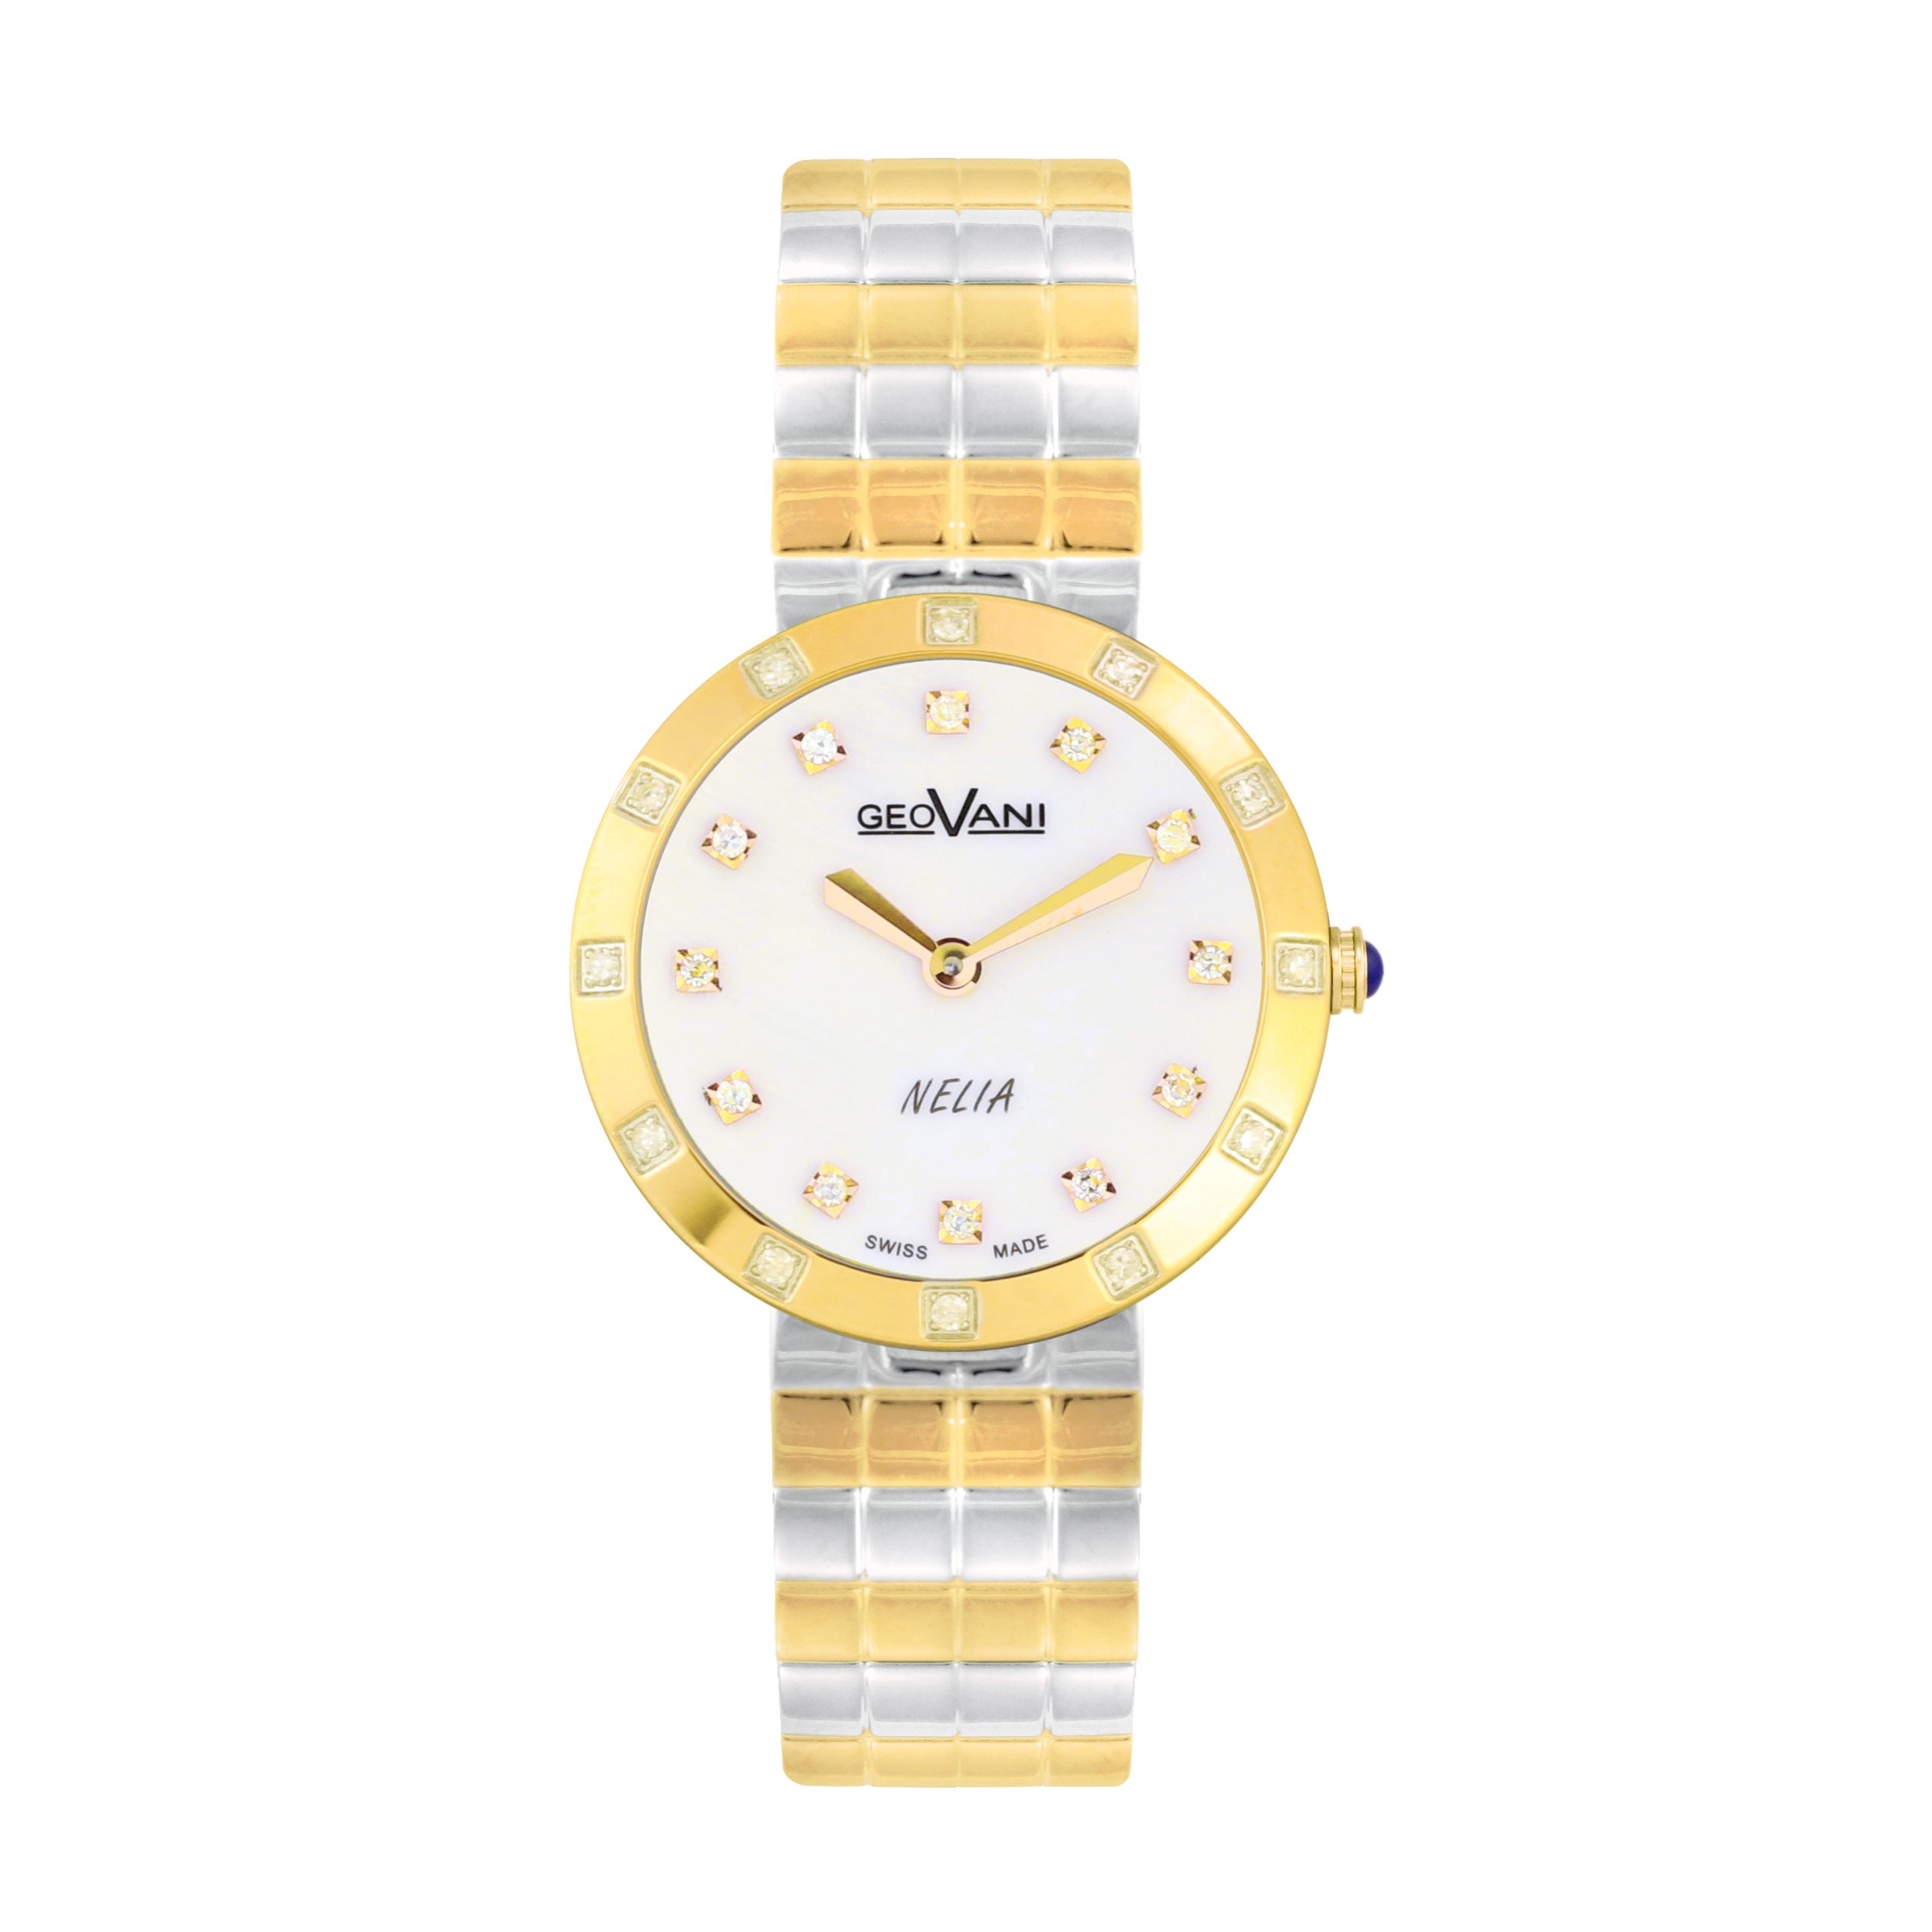 Giovanni Women's Swiss Quartz Watch with Pearly White Dial - GEO-0032